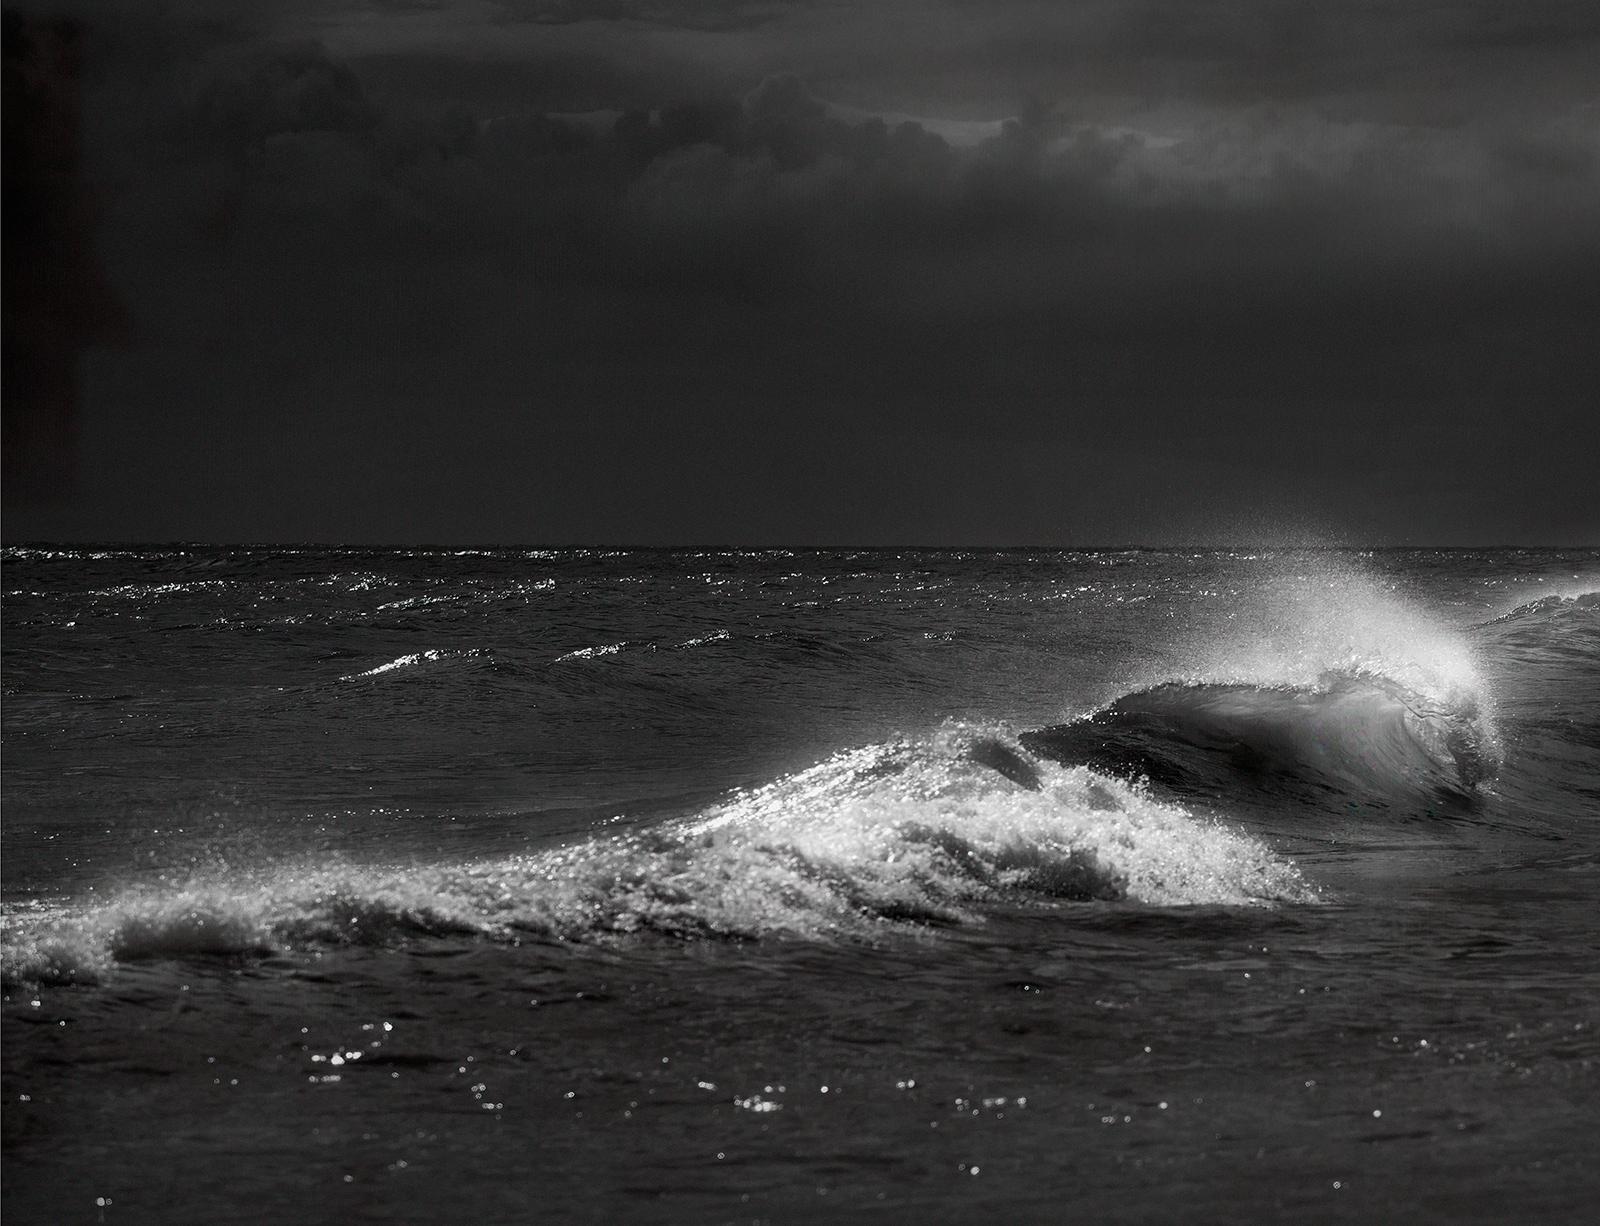 Signed limited edition seascape print, Black white, Oversize sea photo - Embruns - Contemporary Photograph by Ian Sanderson